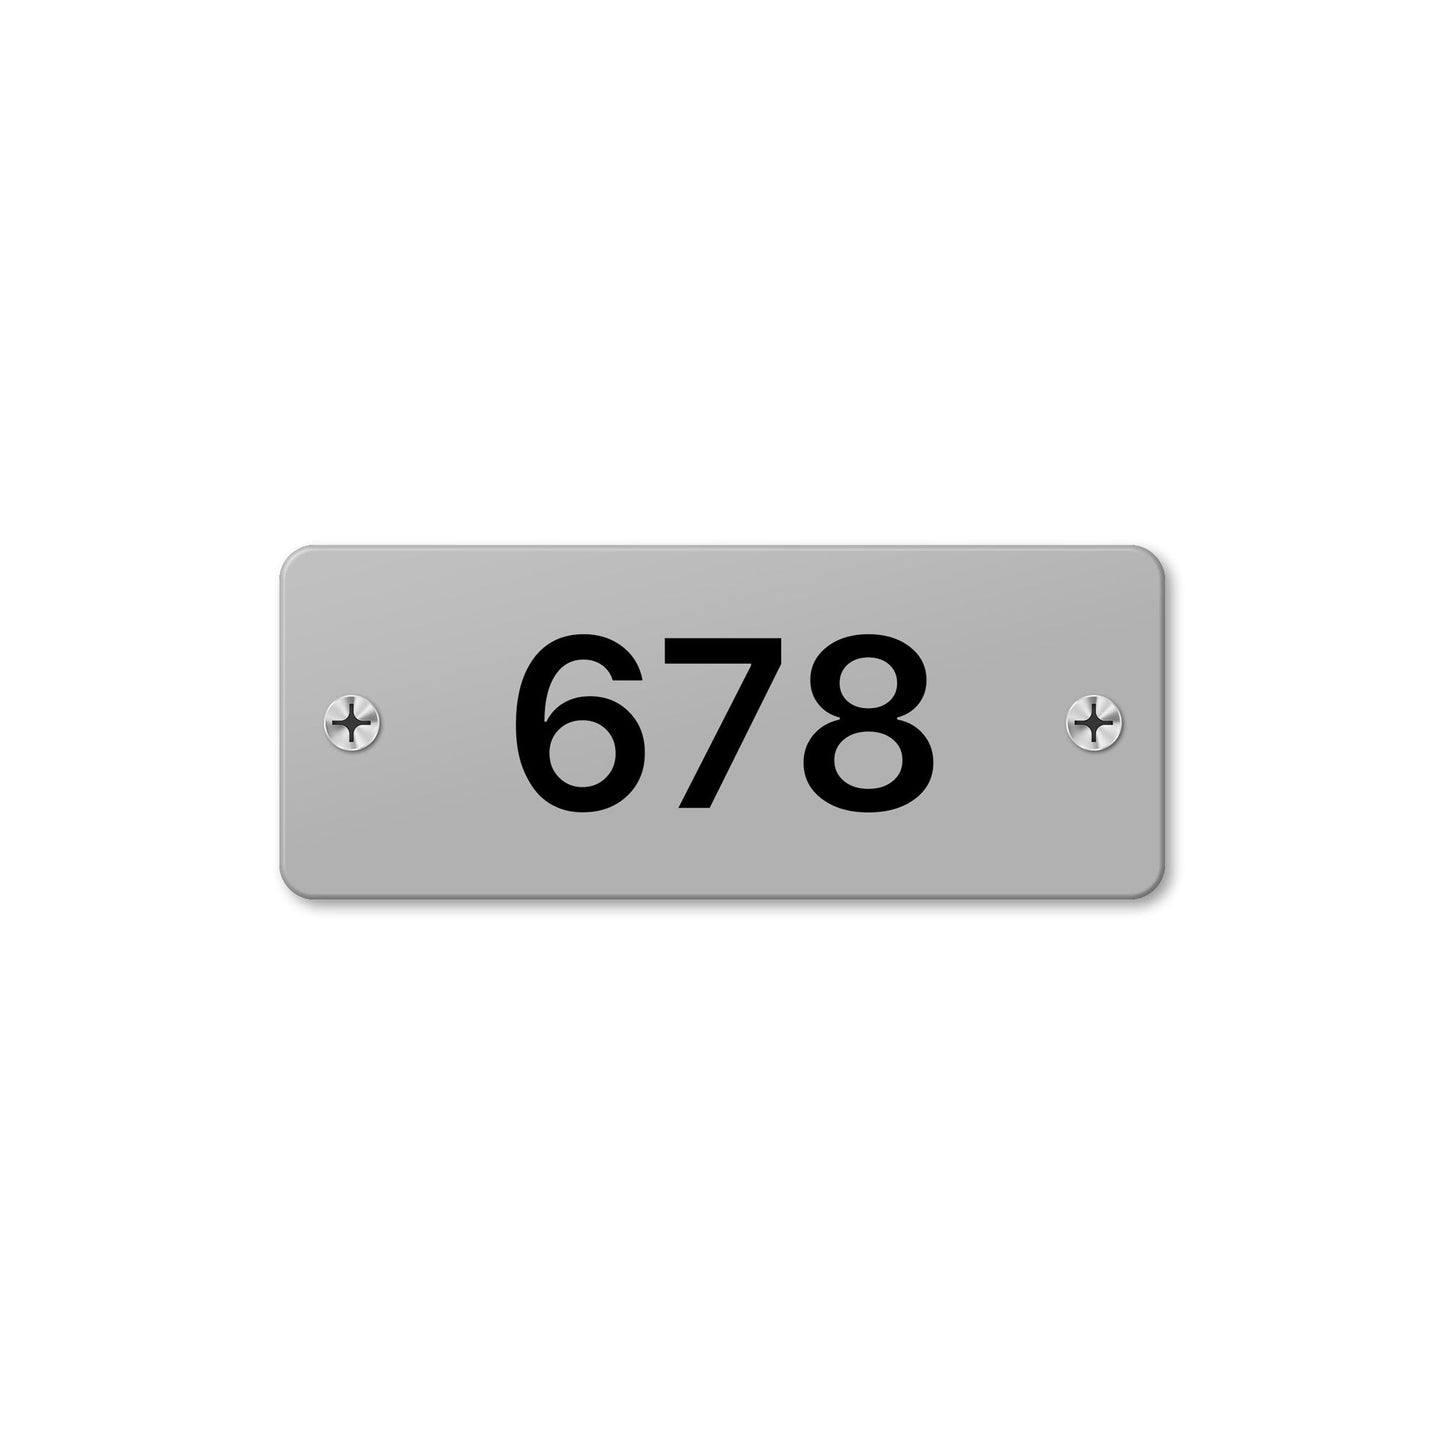 Numeral 678